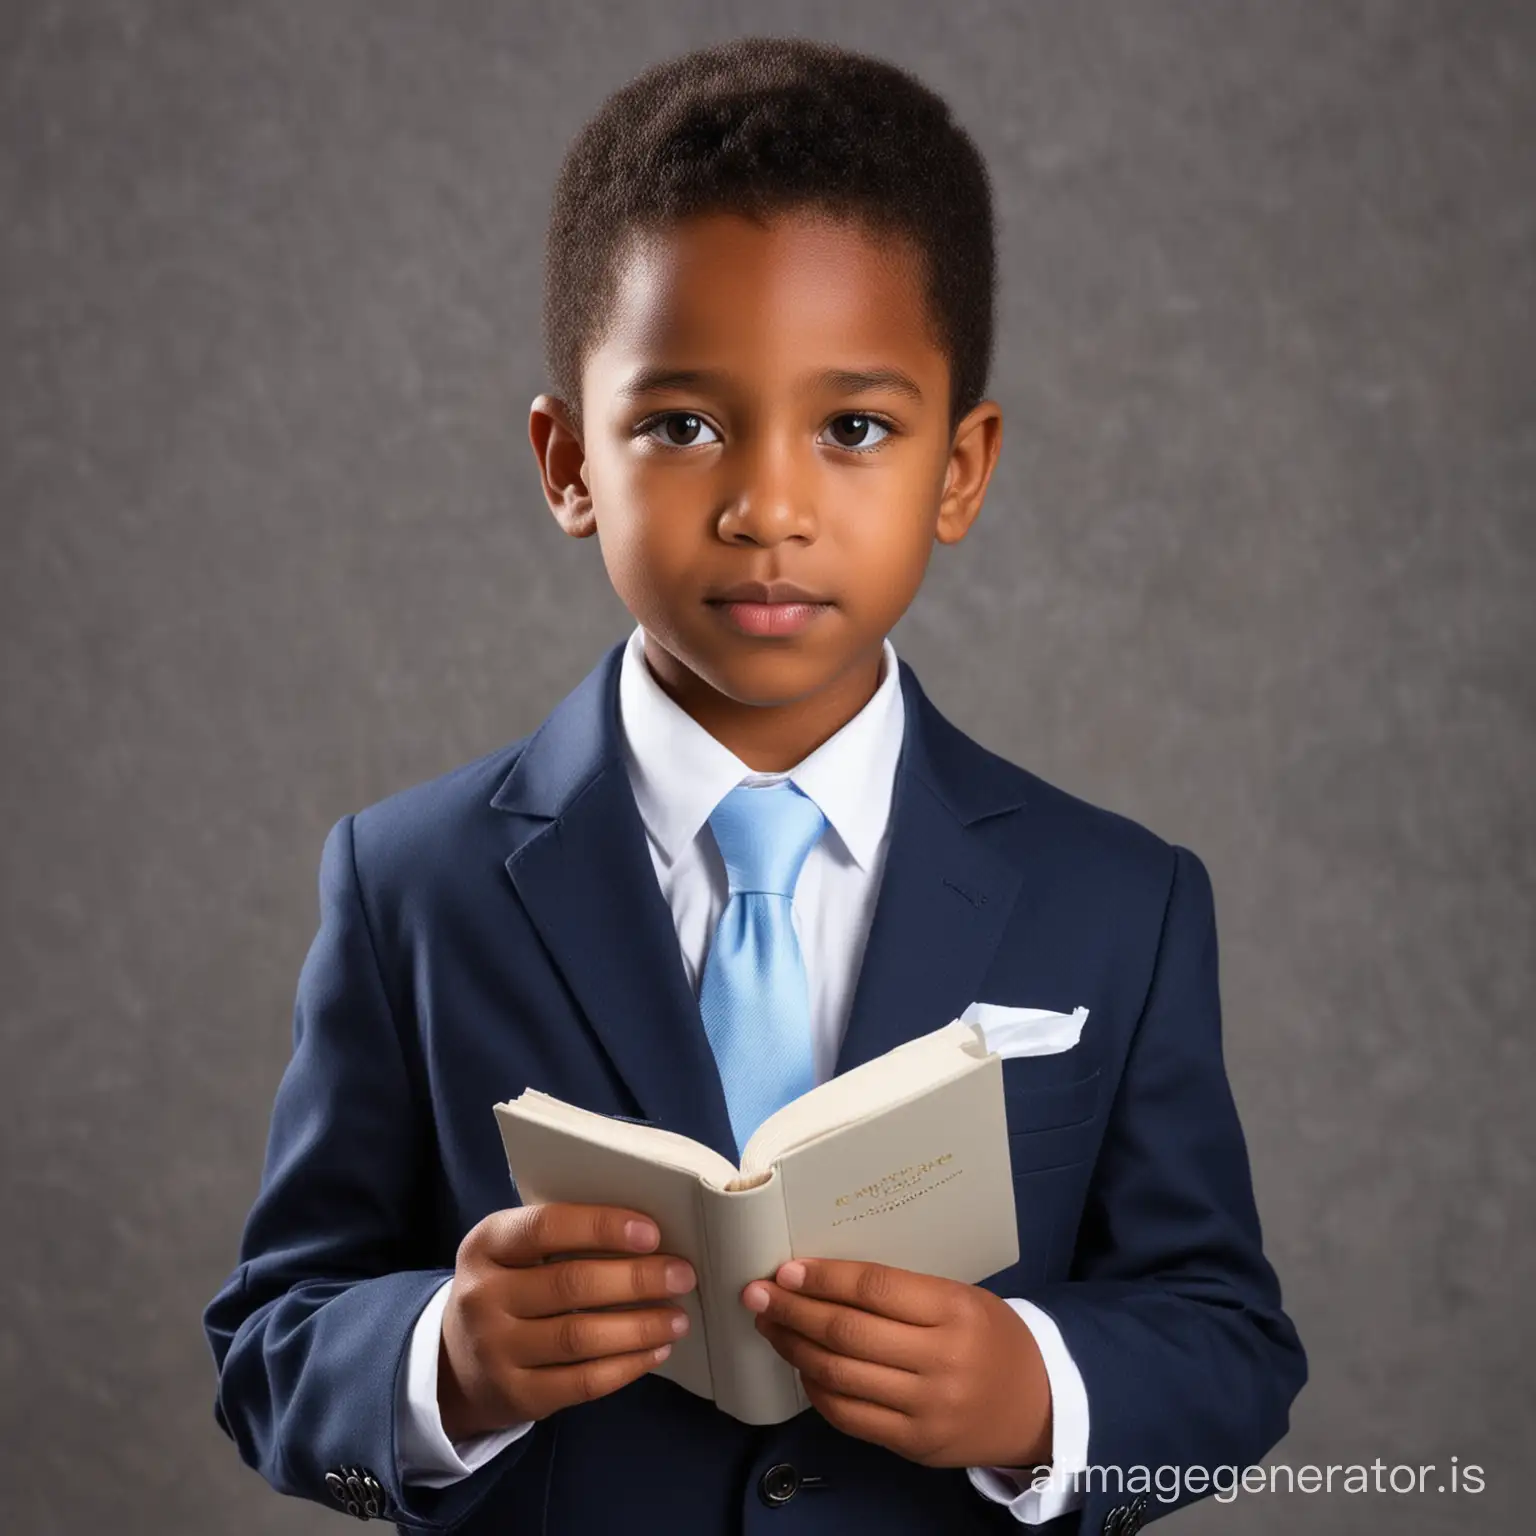 Communion Boy Dark Skin wearing navy blazer, white shirt and light blue tie.   Boy to hold a medium sized white book in his hands.  Lapel to have a very small cross